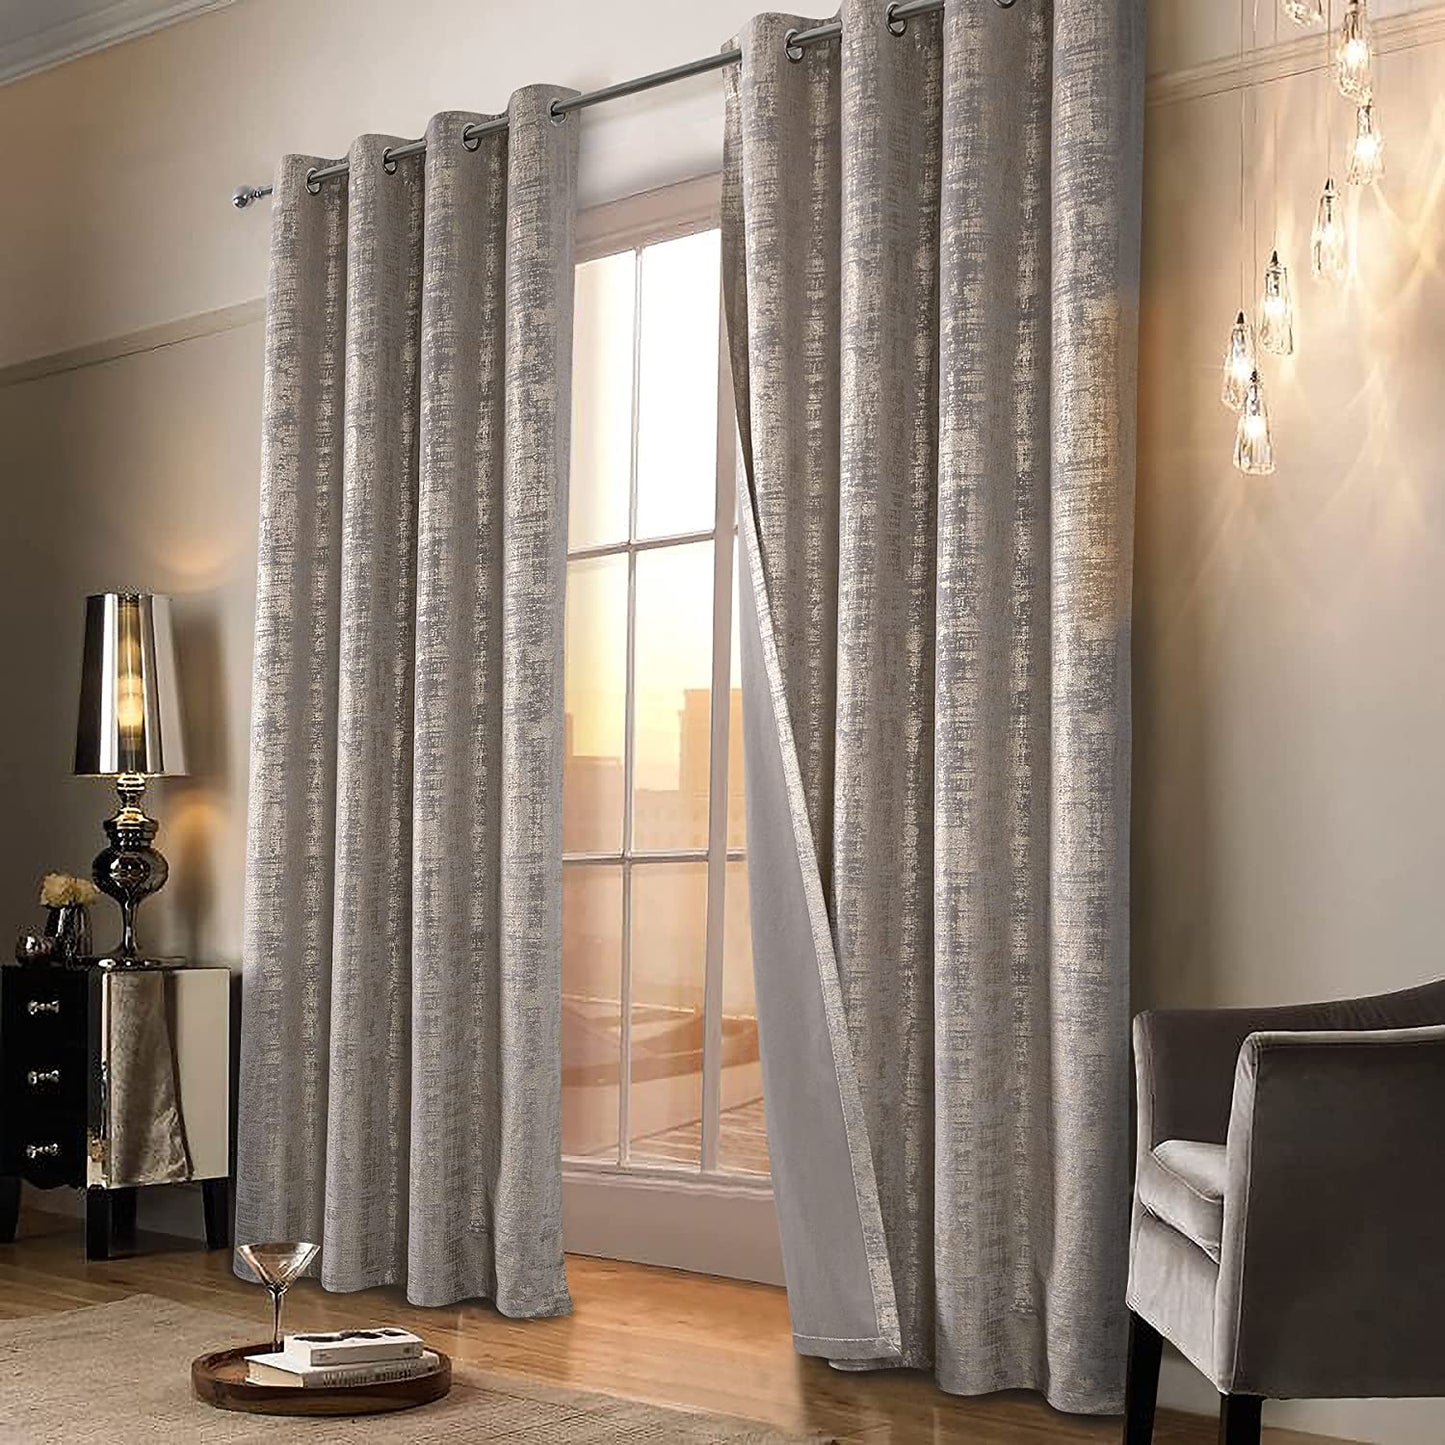 Always4U Soft Velvet Curtains 95 Inch Length Luxury Bedroom Curtains Gold Foil Print Window Curtains for Living Room 1 Panel White  always4u Champagne (Gold Print) 2 Panels: 52''W*95''L 